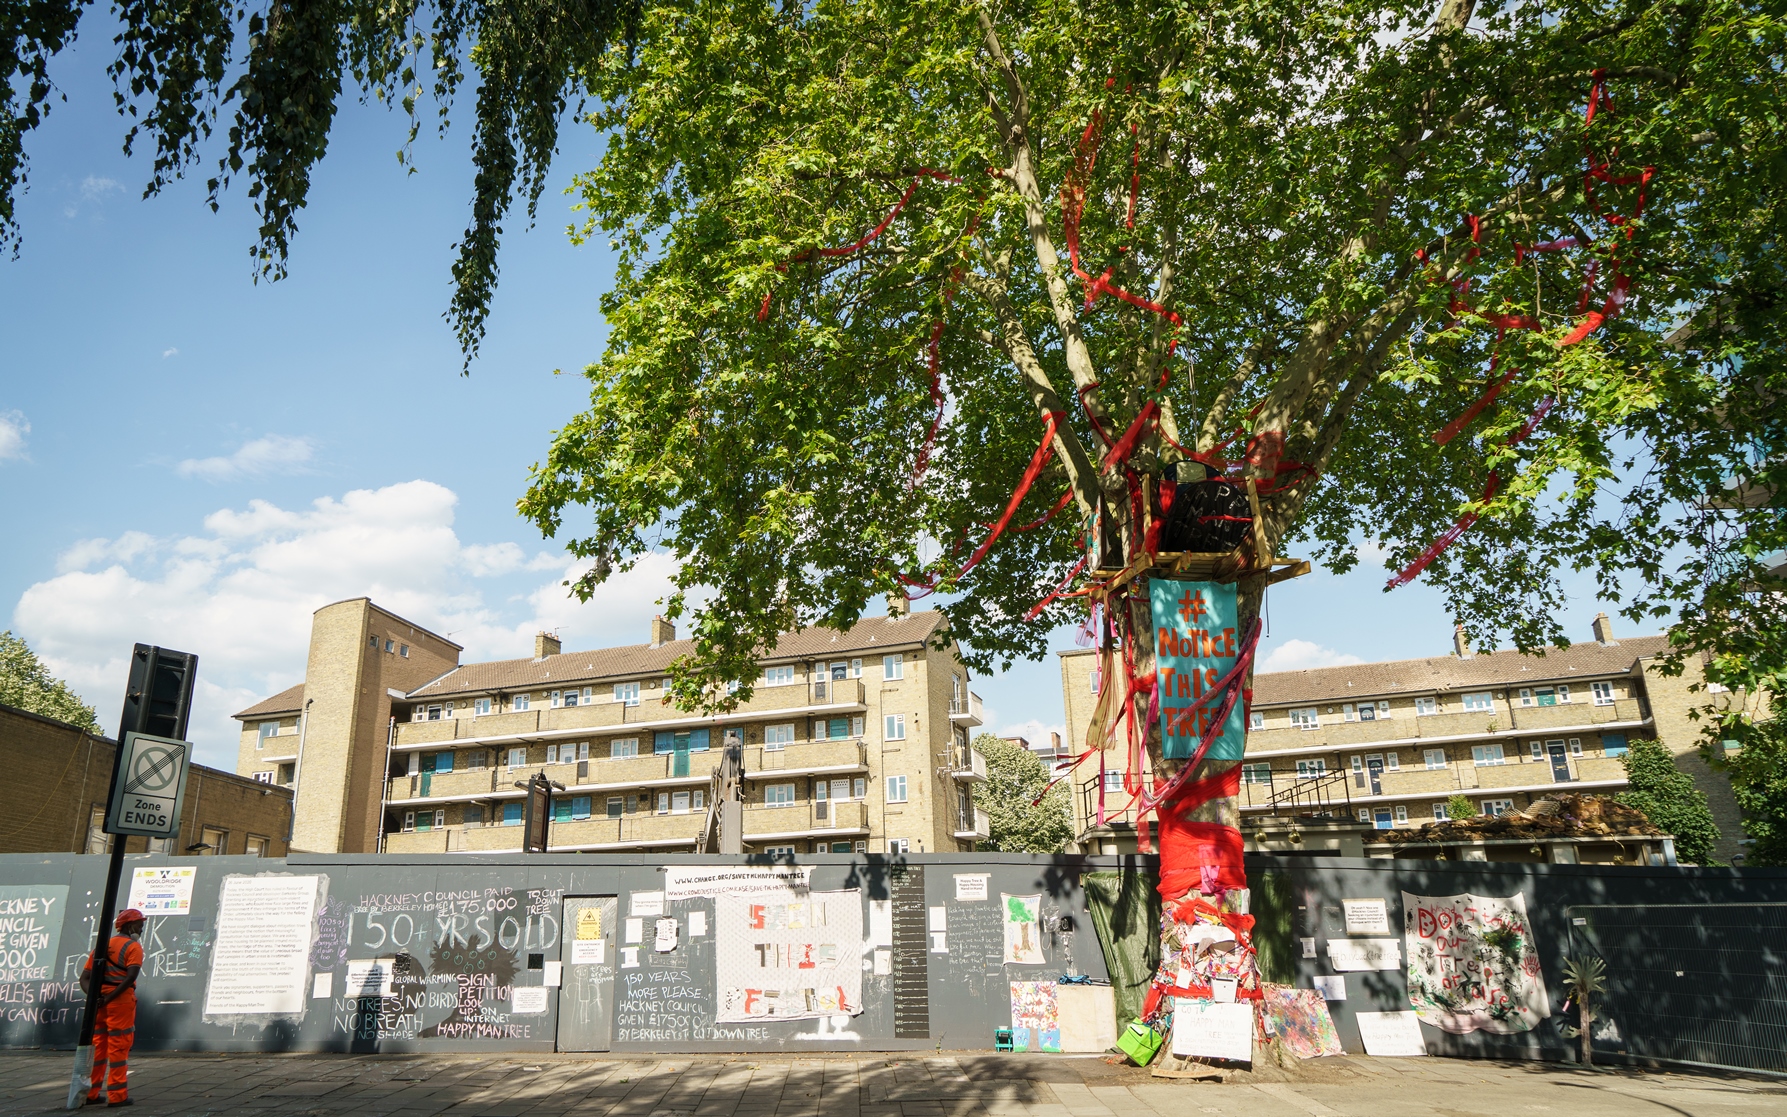 Campaigners have fought to save the 150-year-old plane tree (Tessa Chan)